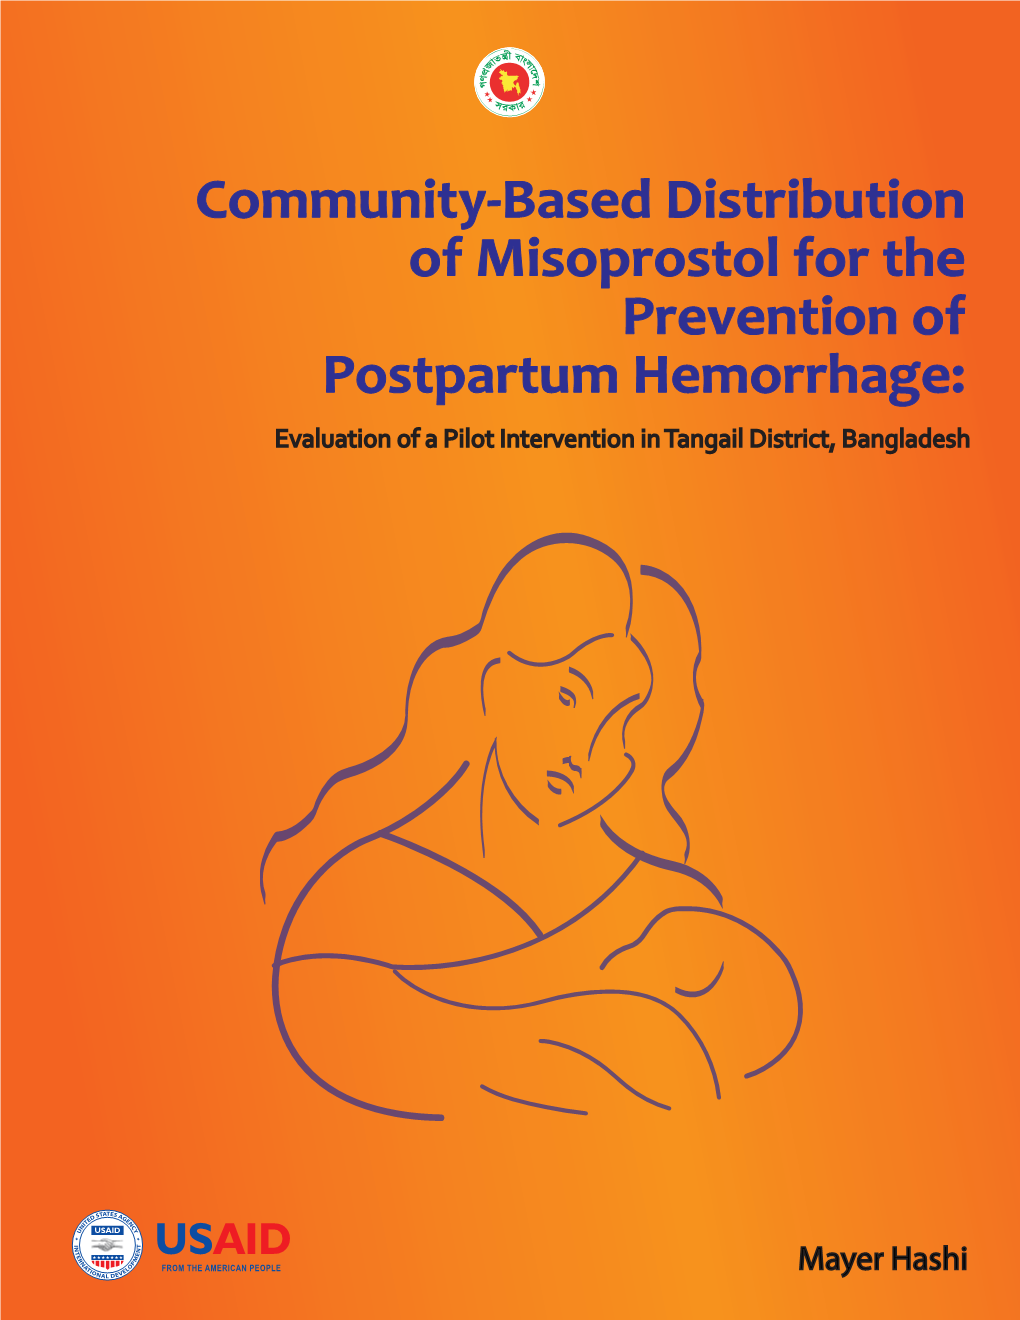 Community-Based Distribution of Misoprostol for the Prevention of Postpartum Hemorrhage: Evaluation of a Pilot Intervention in Tangail District, Bangladesh